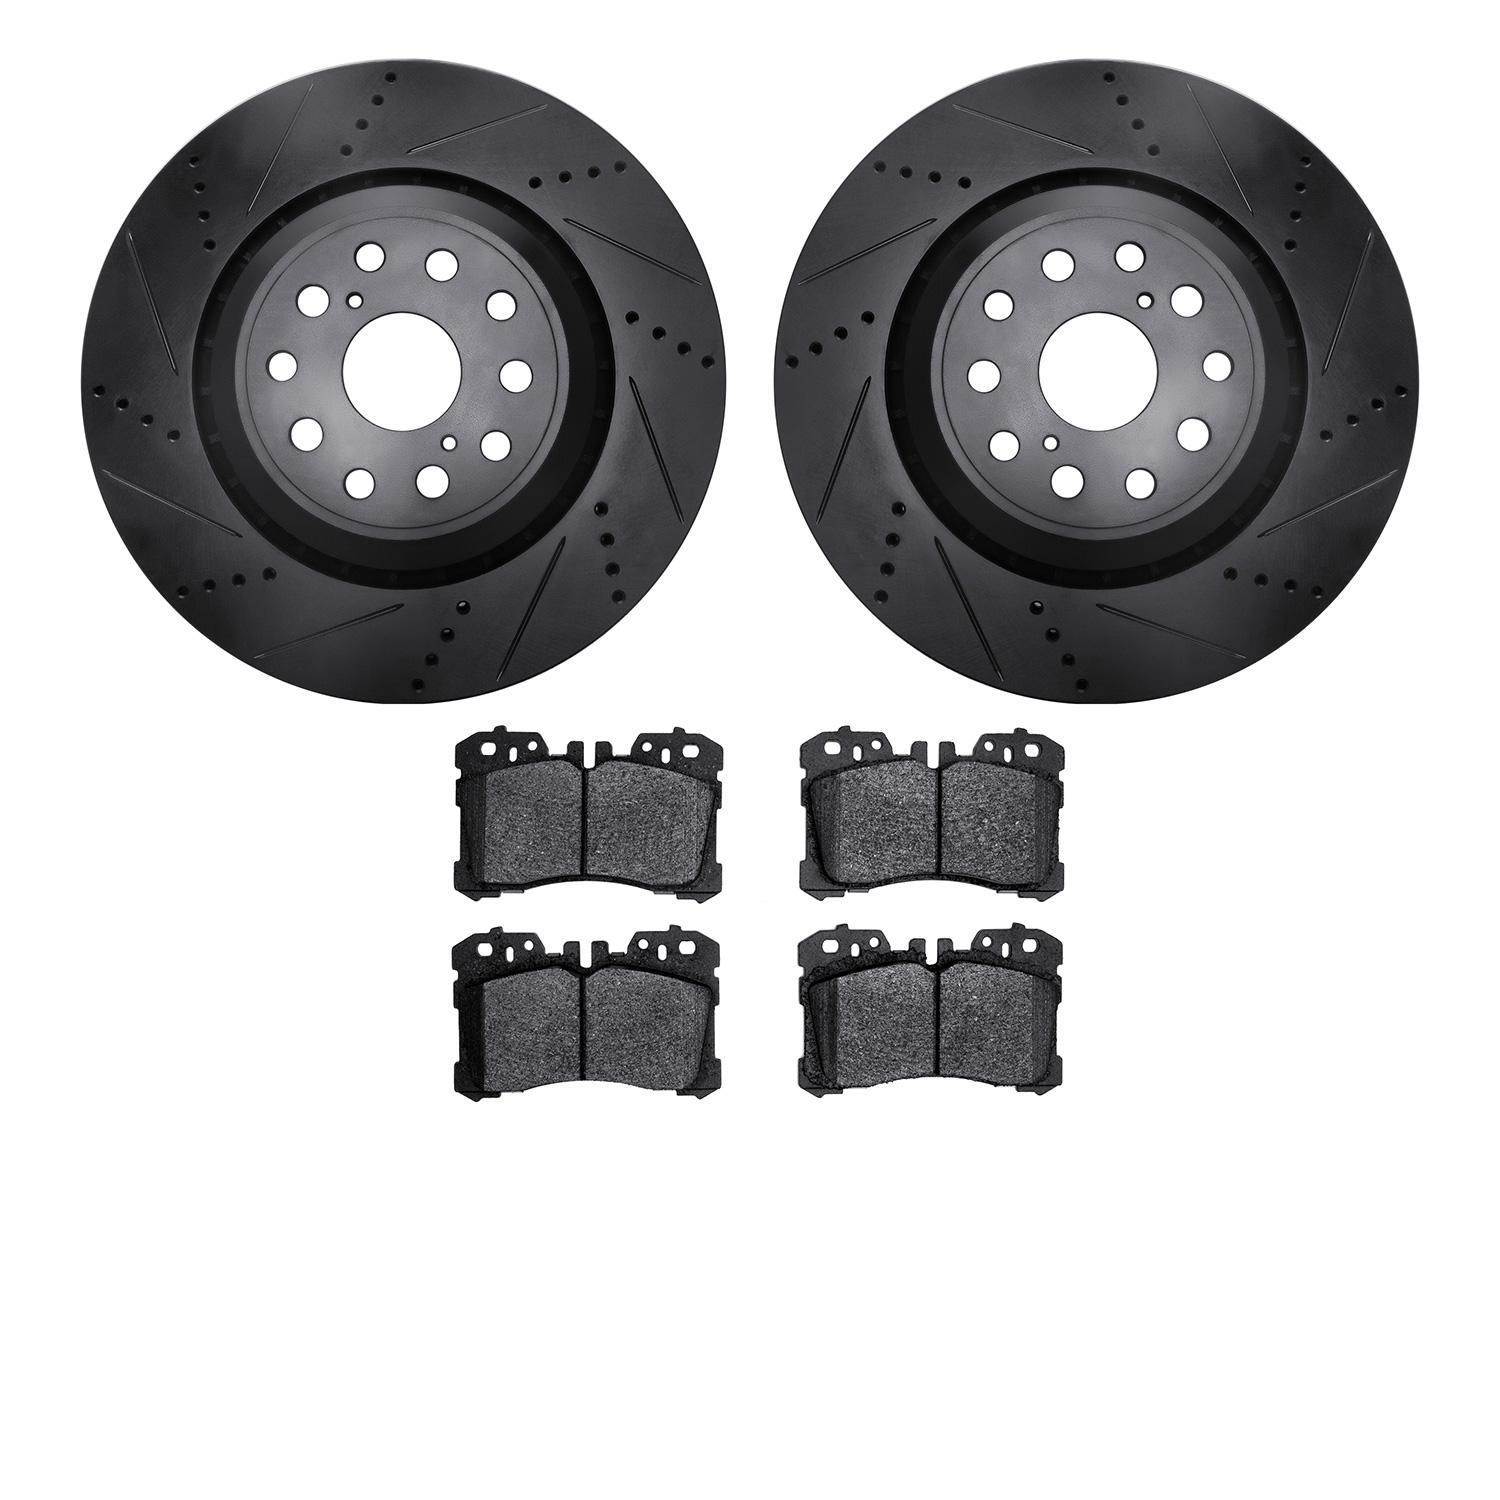 8302-75025 Drilled/Slotted Brake Rotors with 3000-Series Ceramic Brake Pads Kit [Black], Fits Select Lexus/Toyota/Scion, Positio